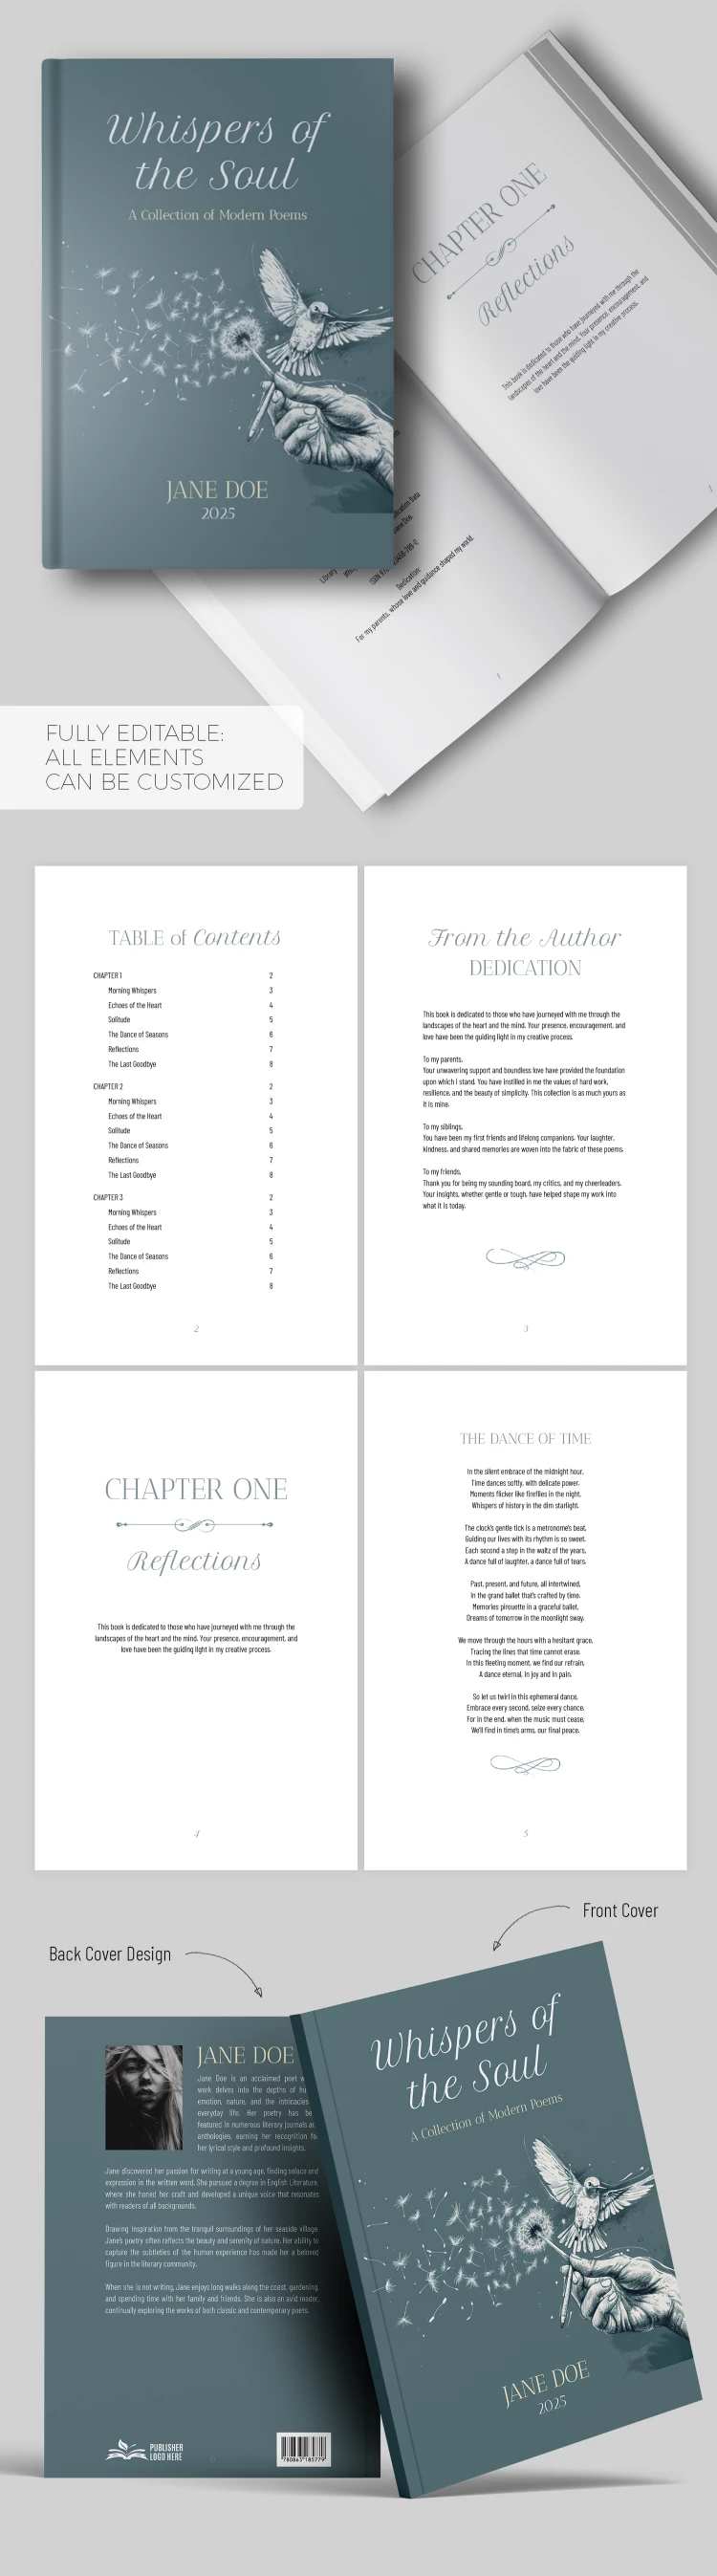 Poetry Book - free Google Docs Template - 10068817